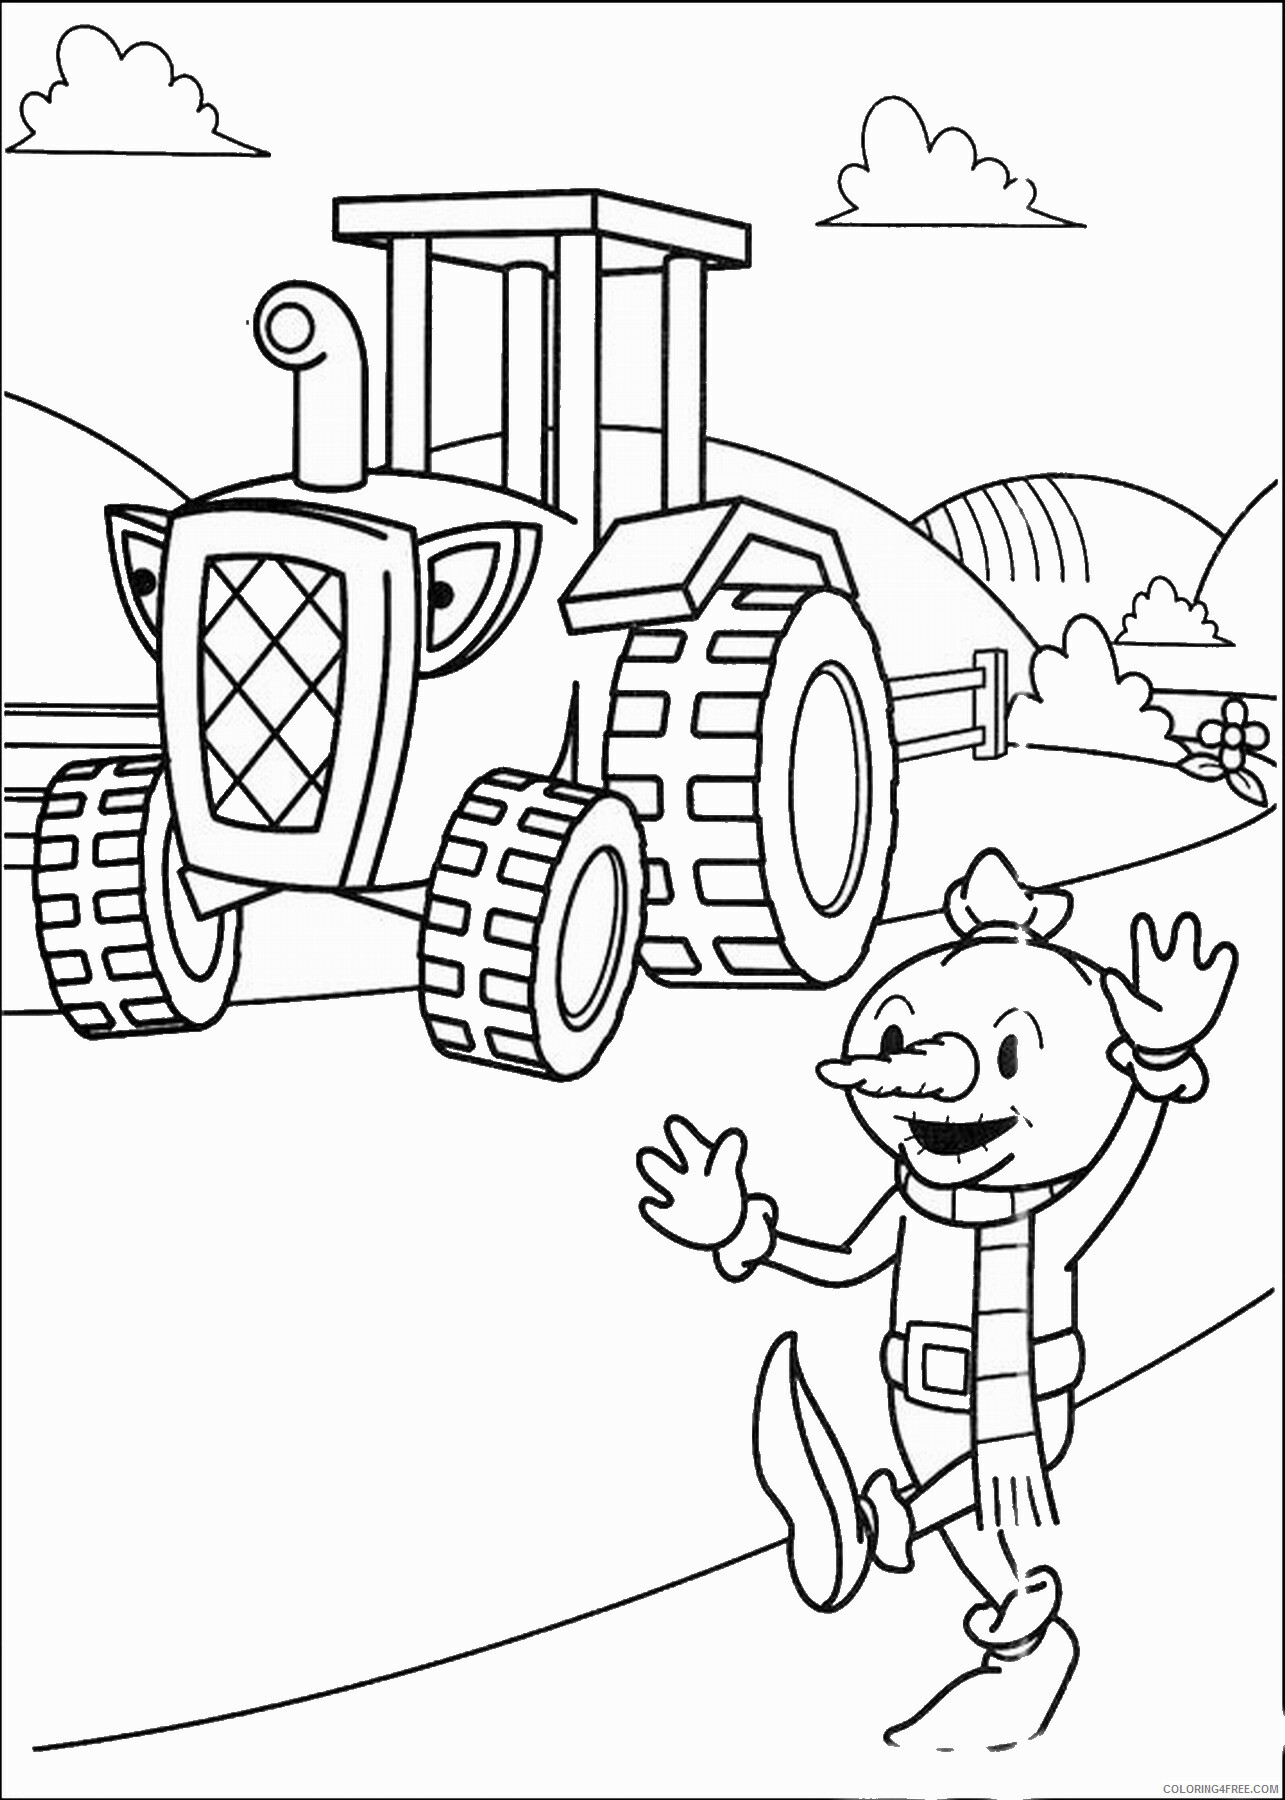 Bob the Builder Coloring Pages TV Film bob the builder_23 Printable 2020 00973 Coloring4free